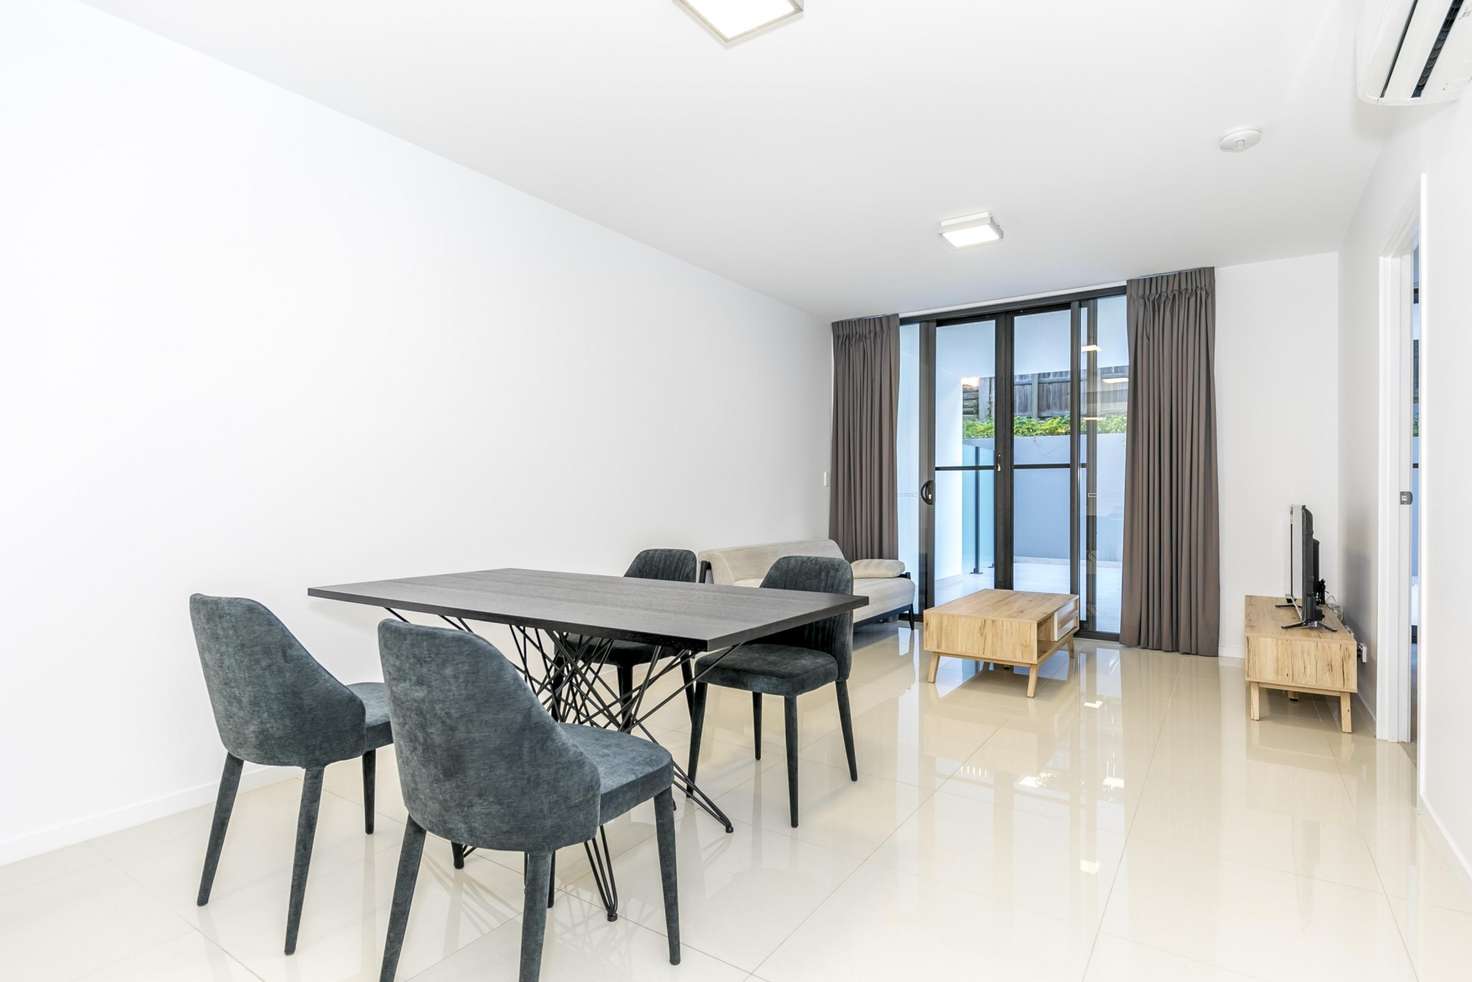 Main view of Homely apartment listing, 105/65 Depper Street, St Lucia QLD 4067